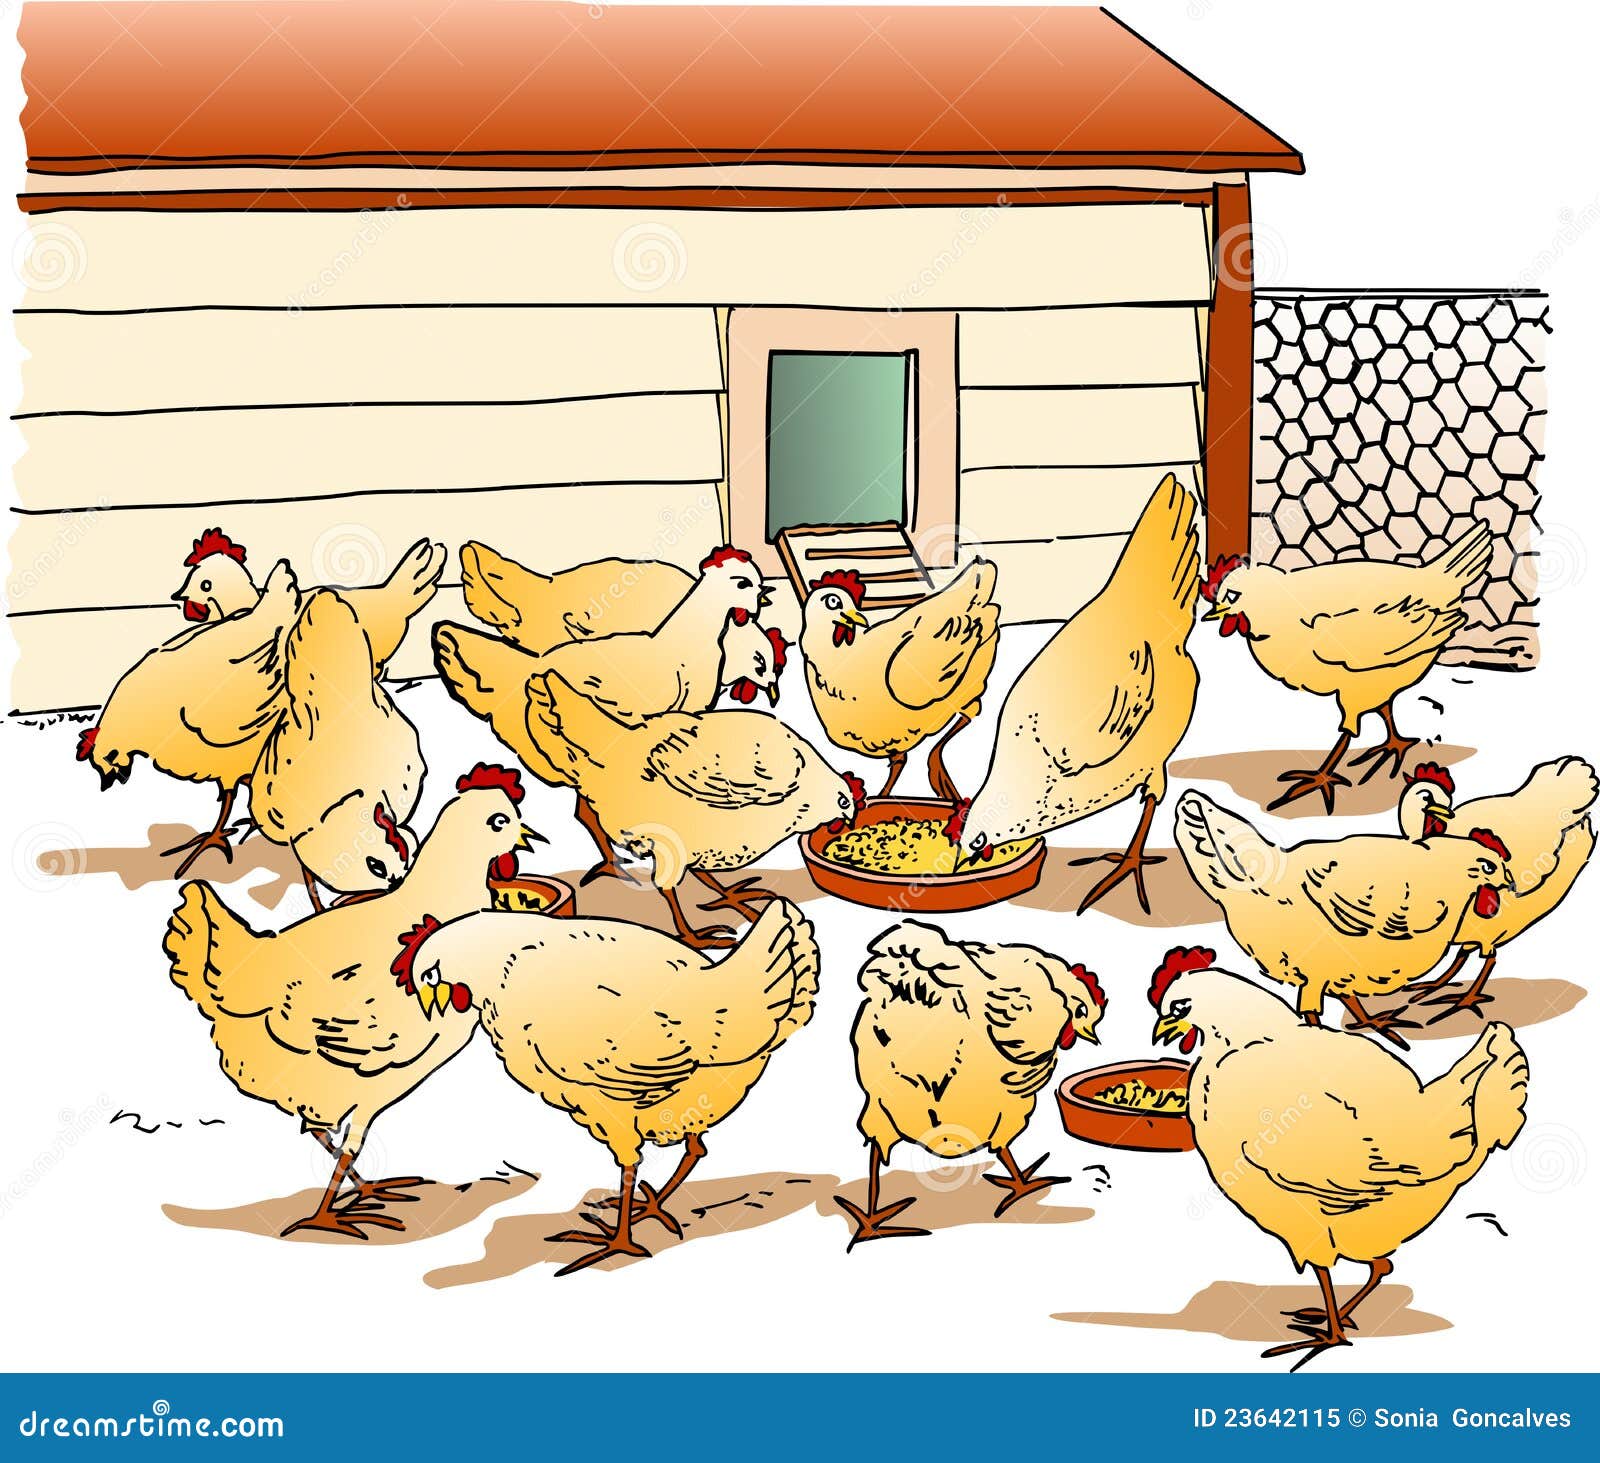 chicken house clipart - photo #22